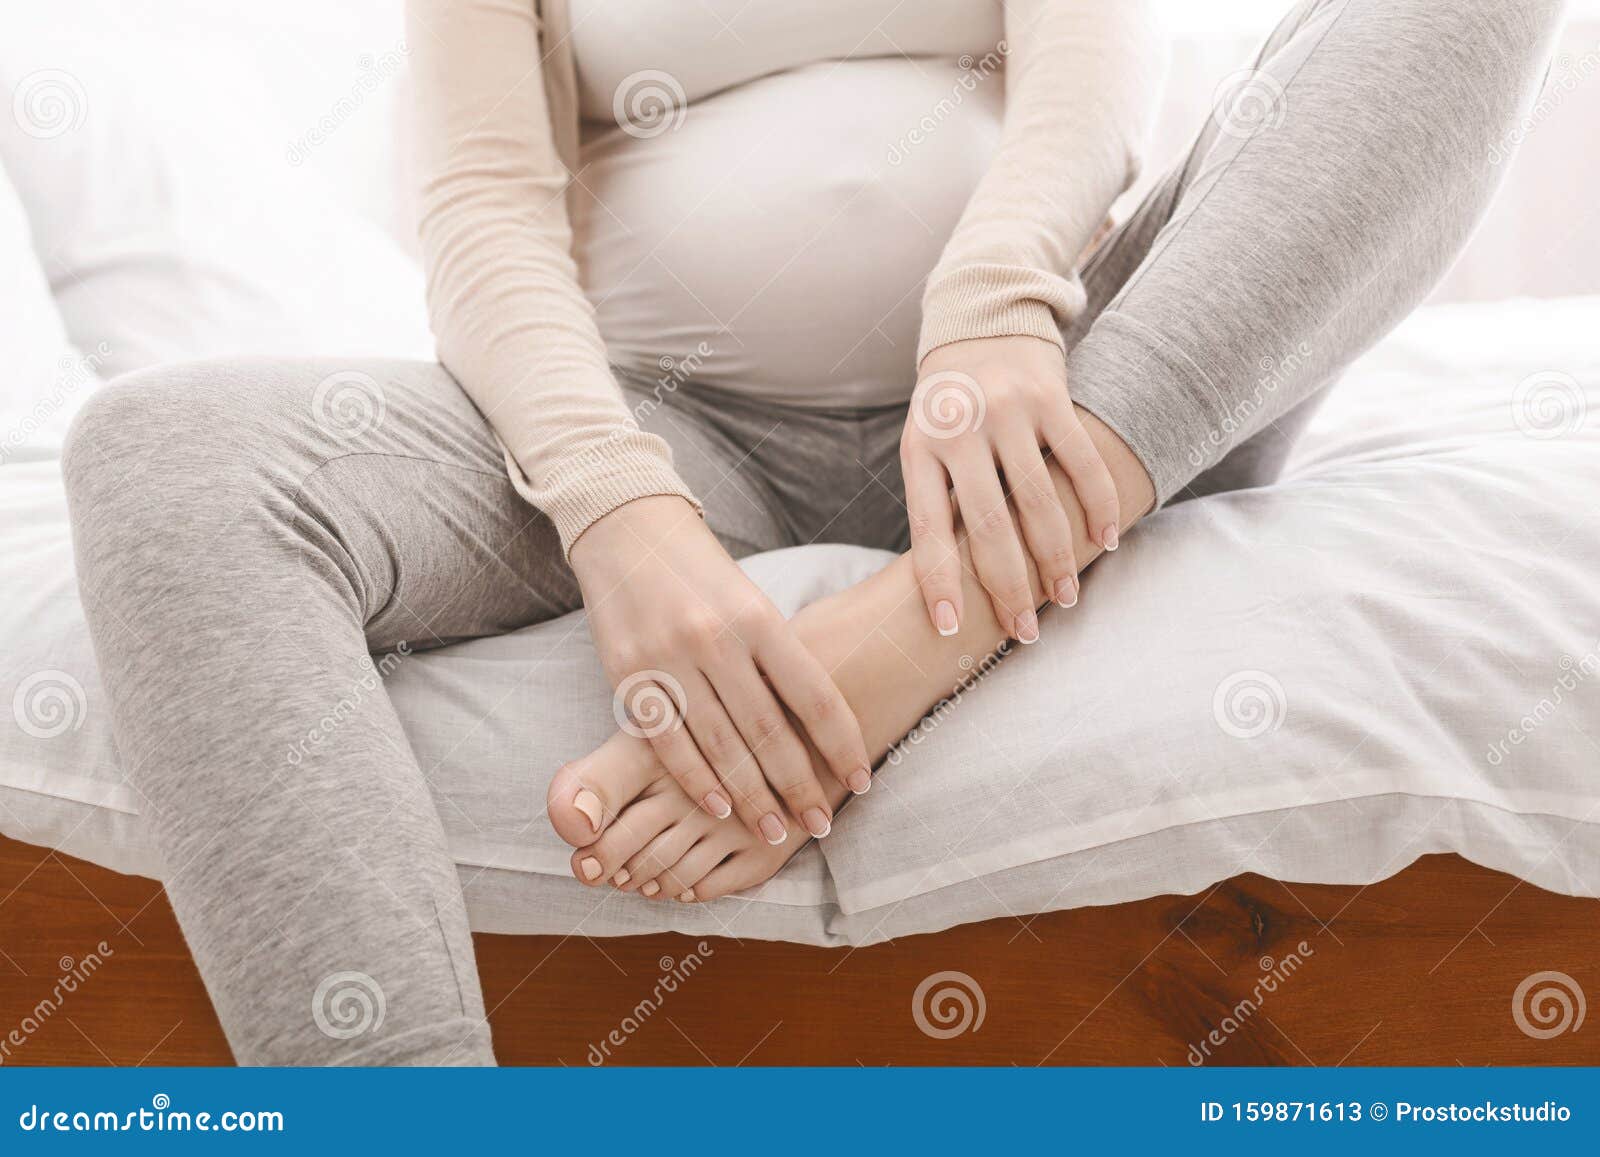 Pregnant Woman Massaging Her Swollen Foot Sitting On Bed Stock Image Image Of Female Joint